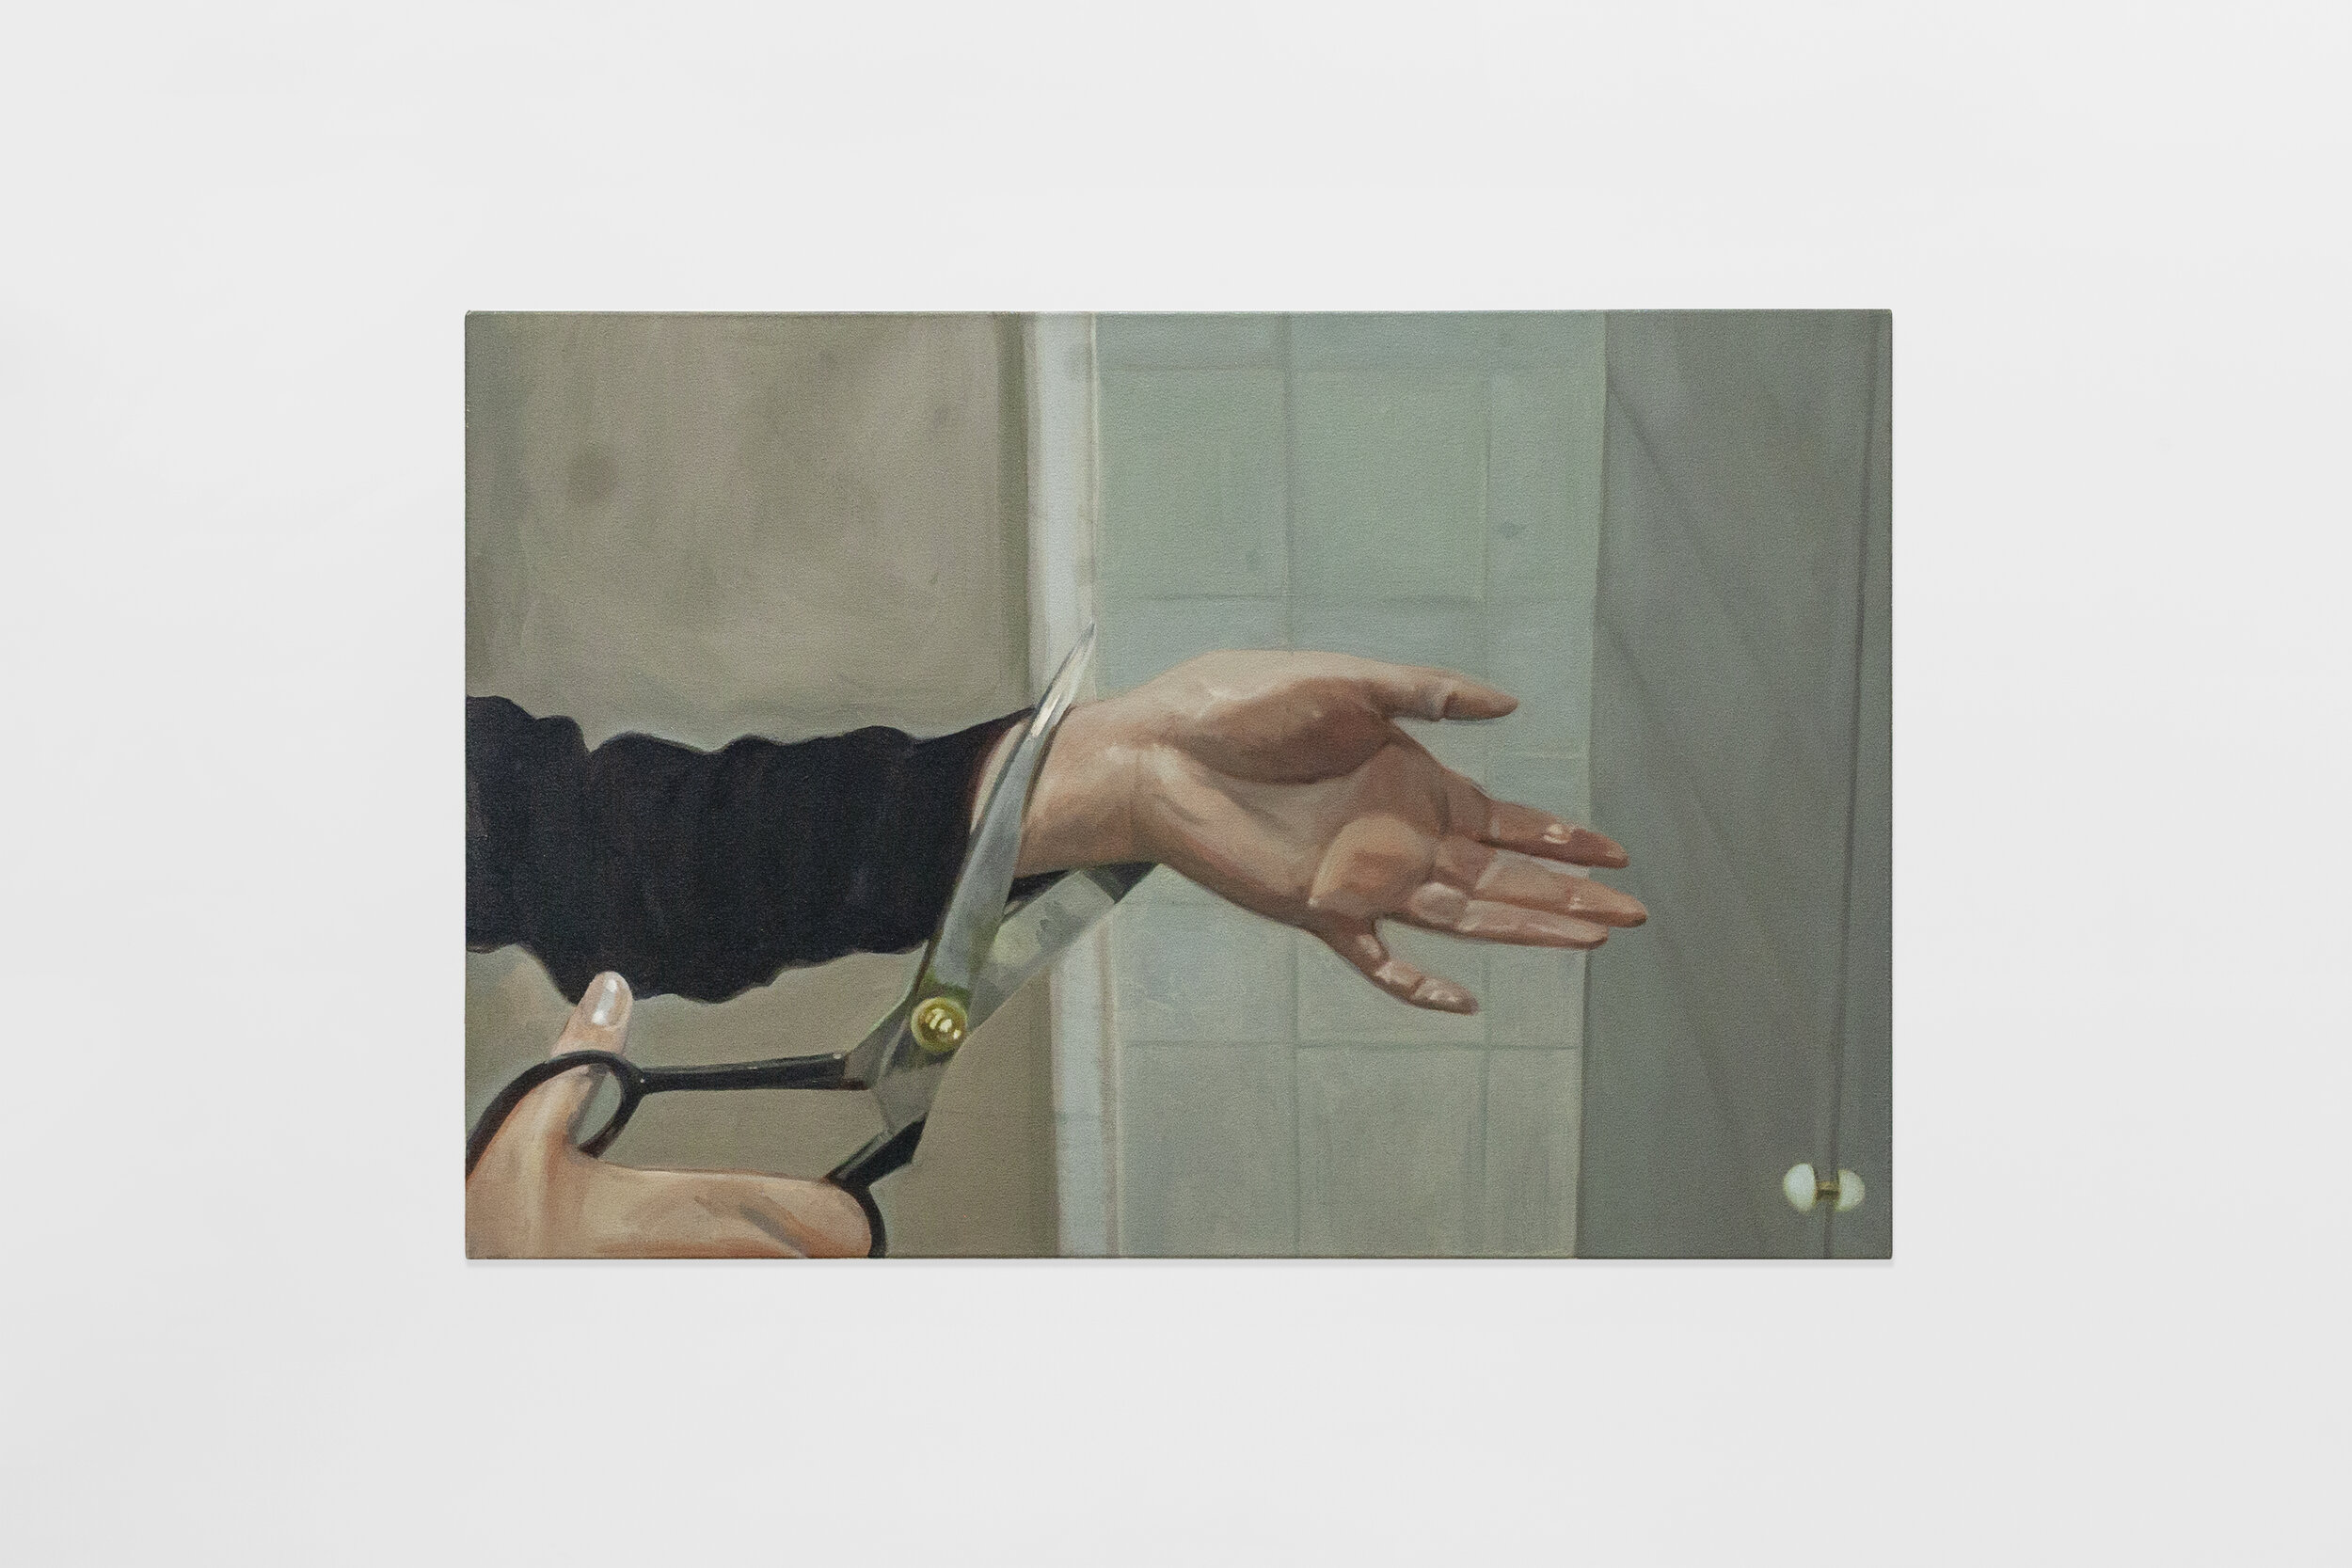  Shannon Cartier Lucy,  If My Hand Offends , 2019, oil on canvas, 25 x 34 in. 